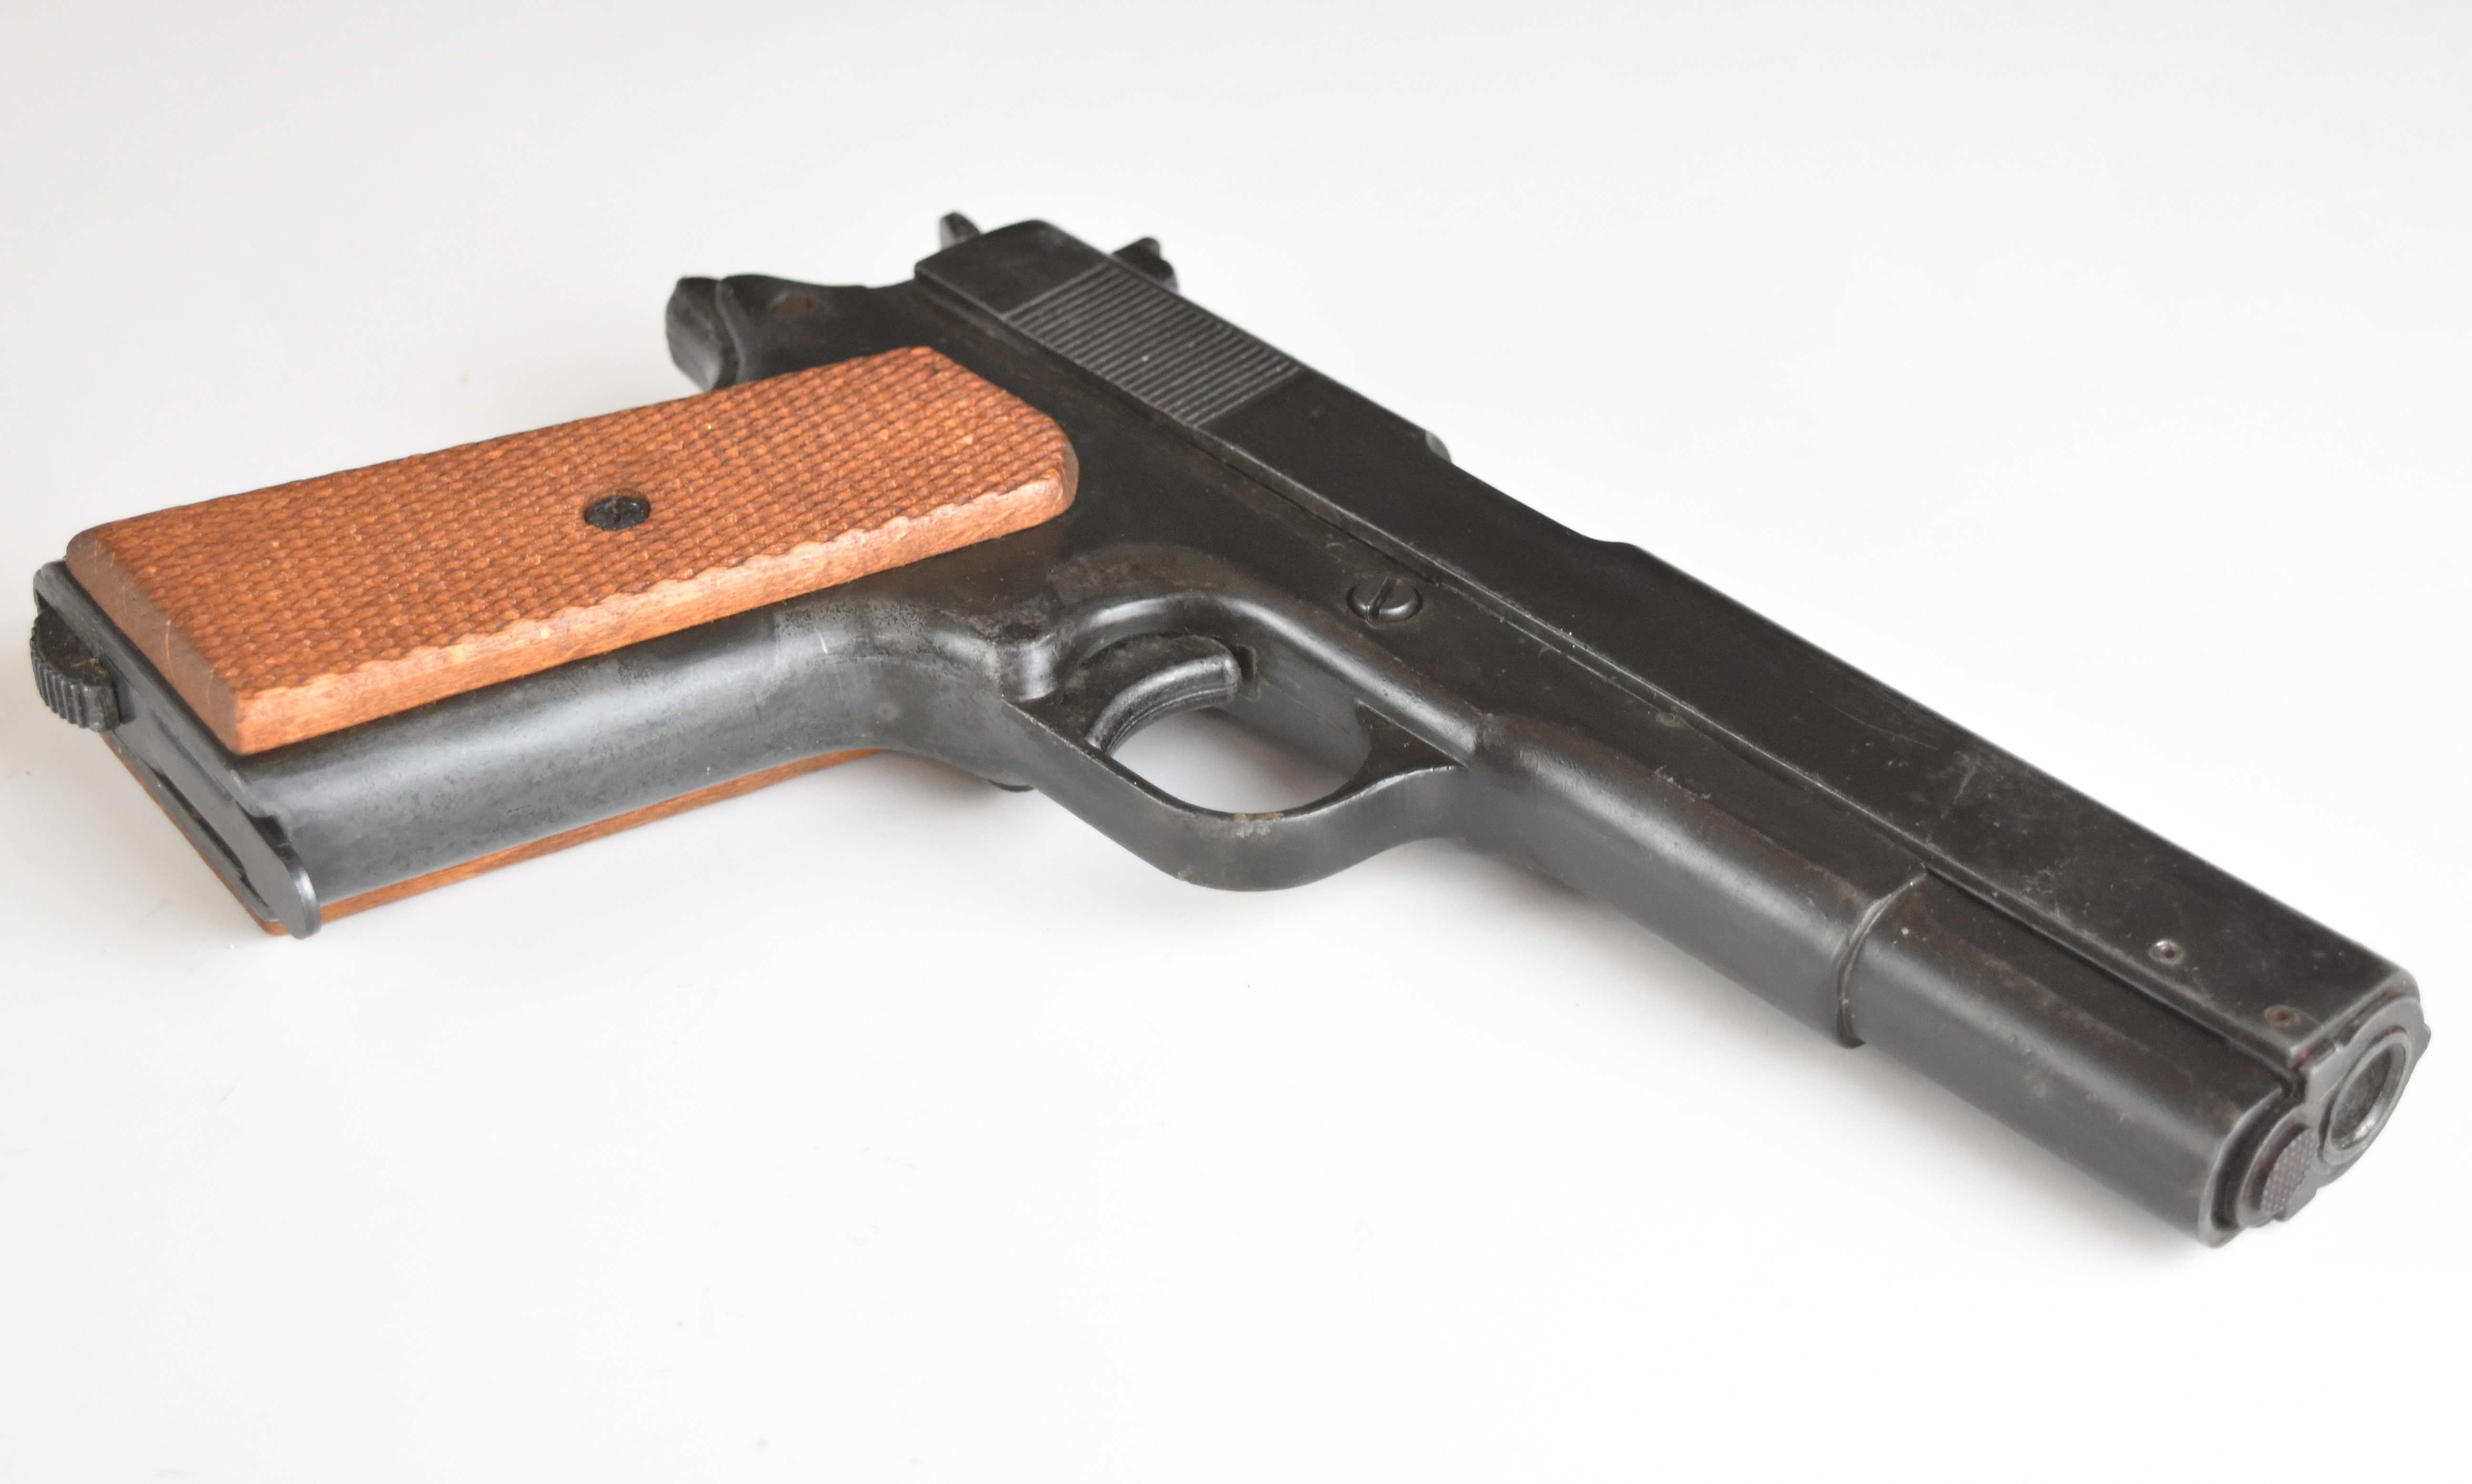 BBM Bruni 8mm blank firing pistol with chequered wooden grips, in original fitted box. - Image 5 of 14